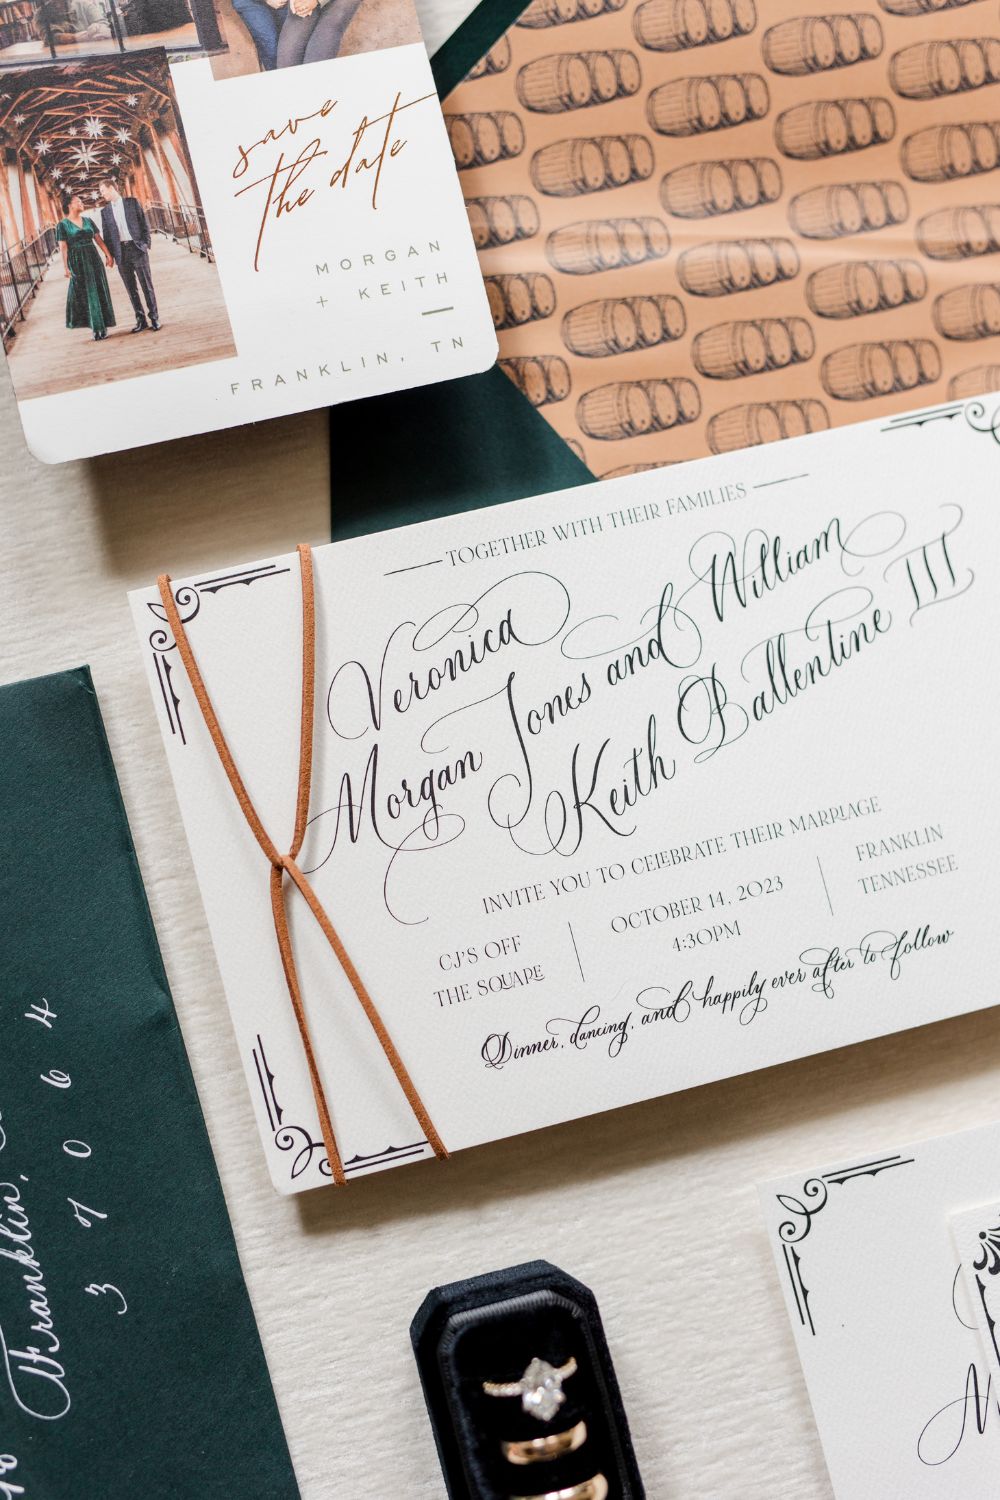 wedding invitation for fall garden wedding at CJ's off the square in Franklin tennessee